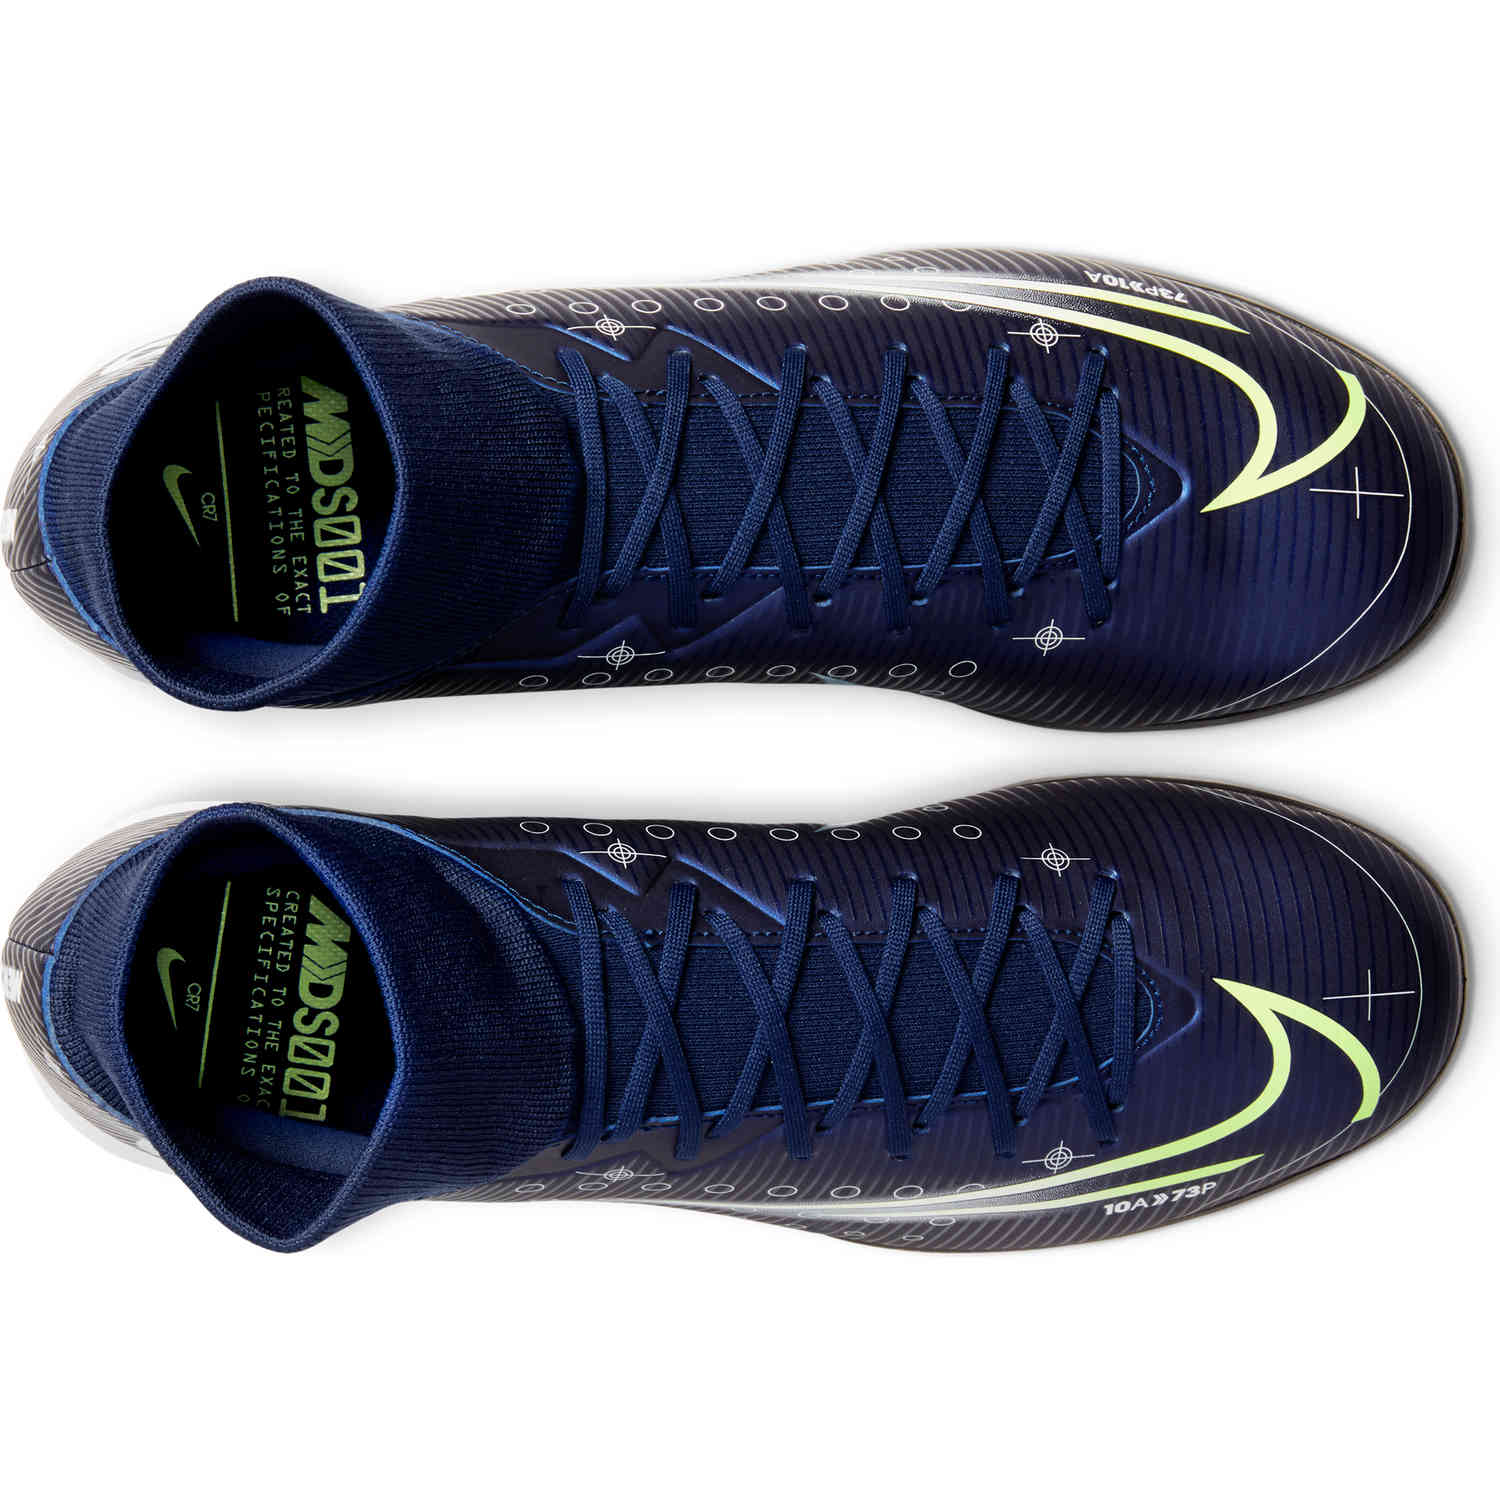 Nike Launches The Mercurial Dream Speed 2 Footy boots